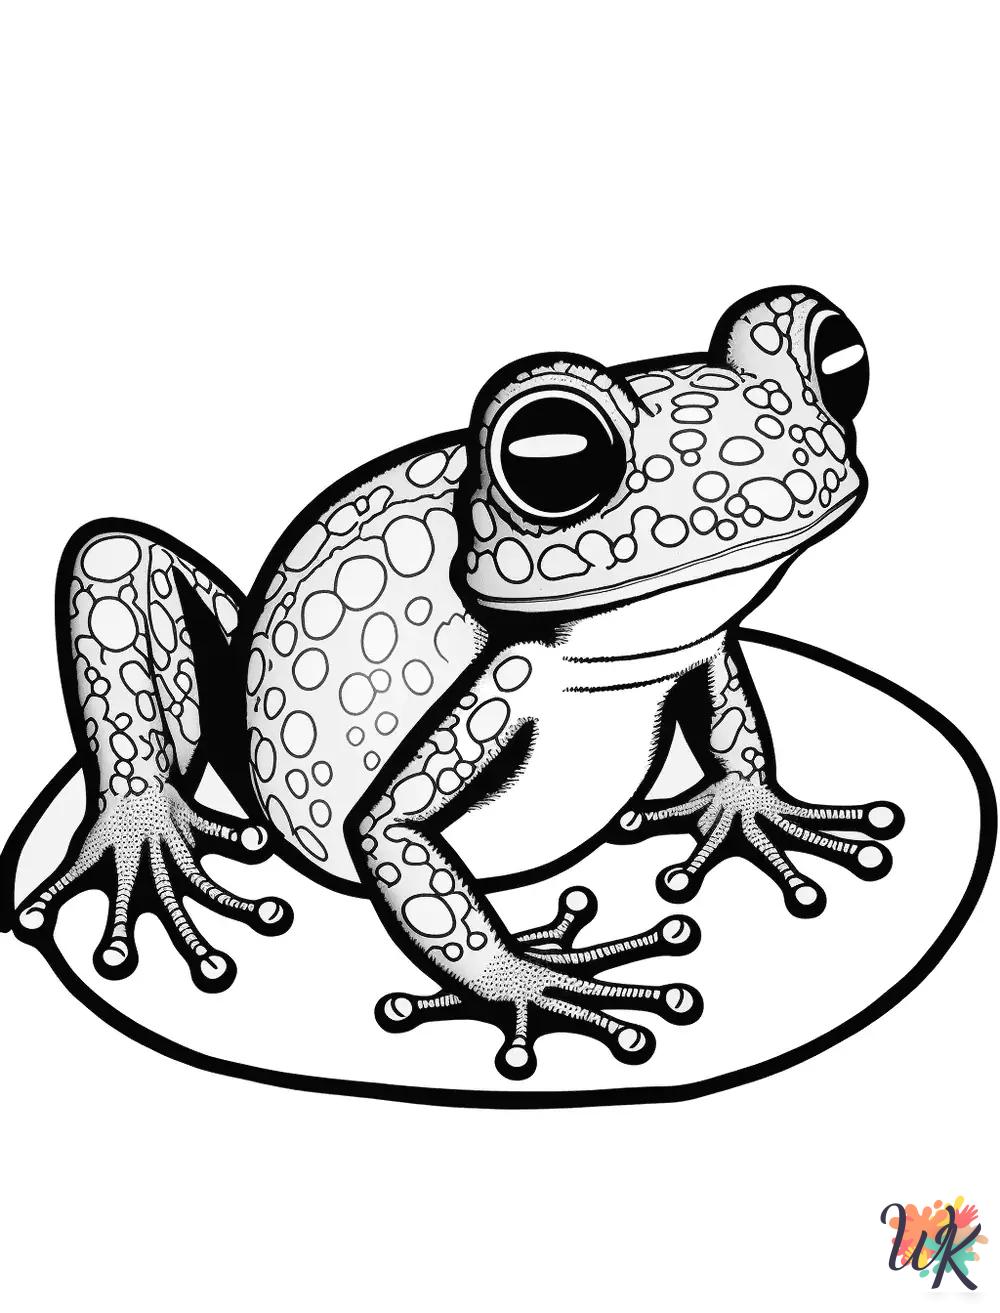 Frog coloring book pages